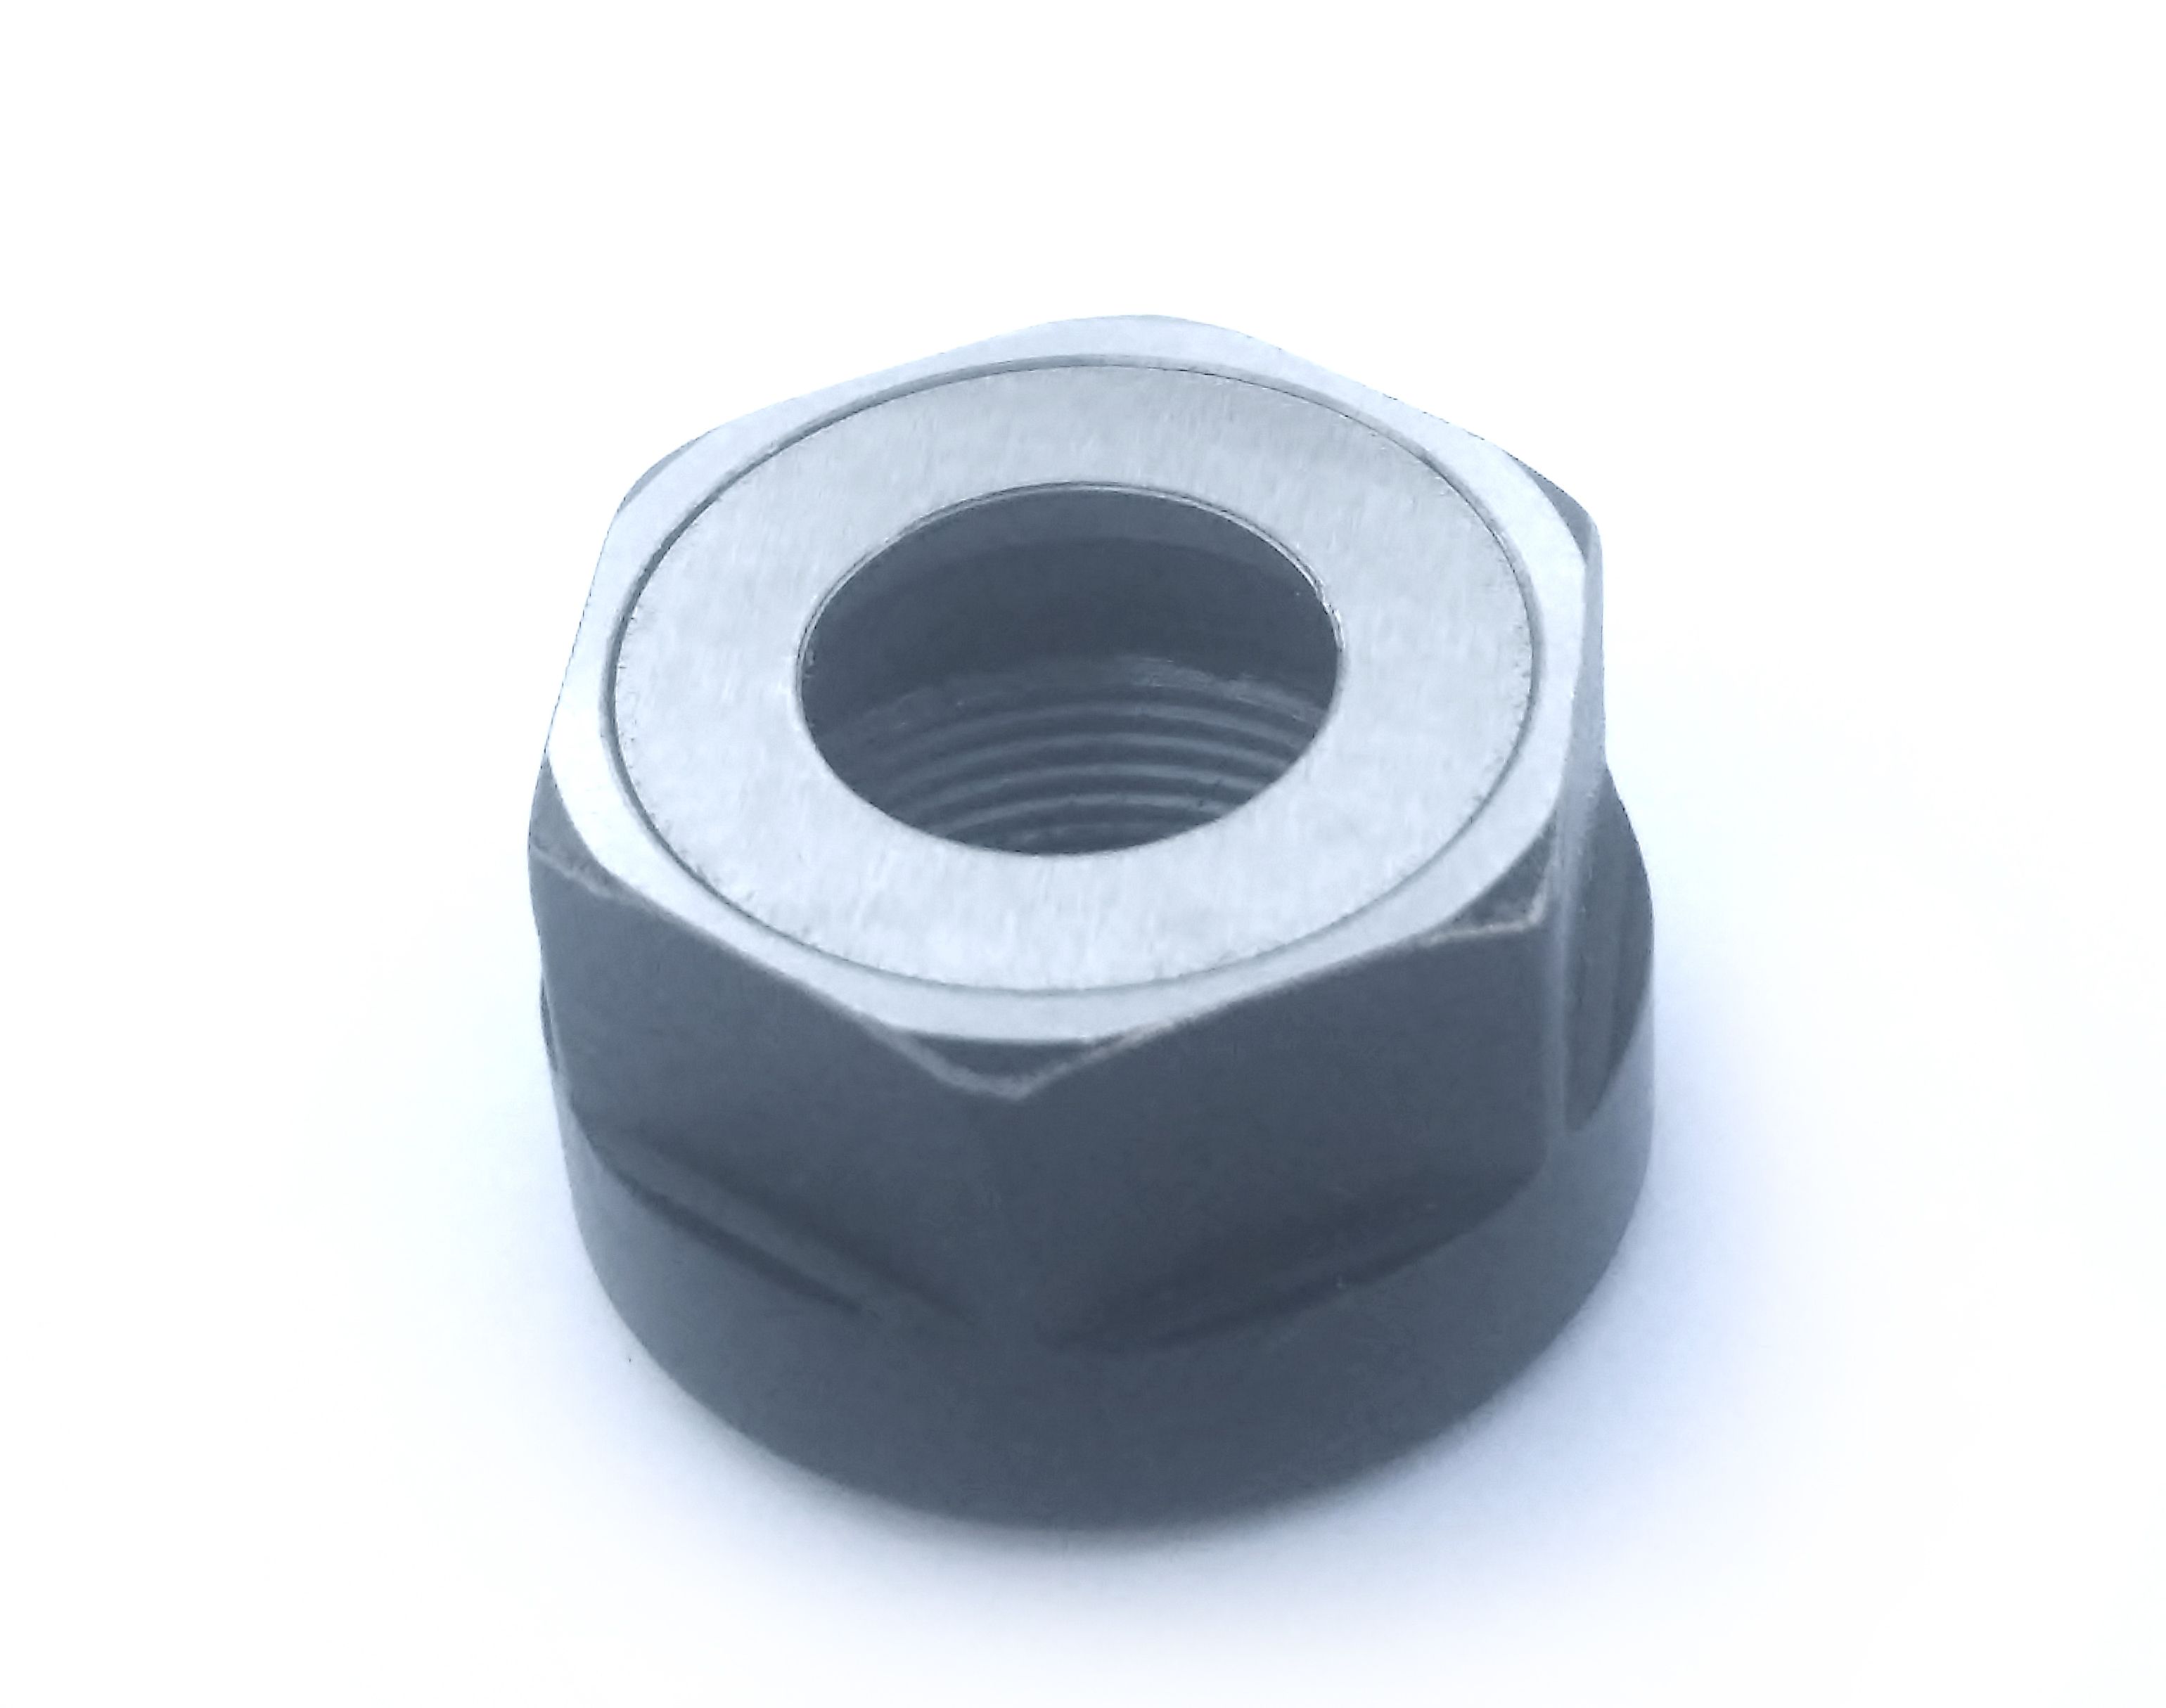 A-TYPE M14 X .75 BEARING TYPE ER-11 COLLET CHUCK NUT (3900-0654)